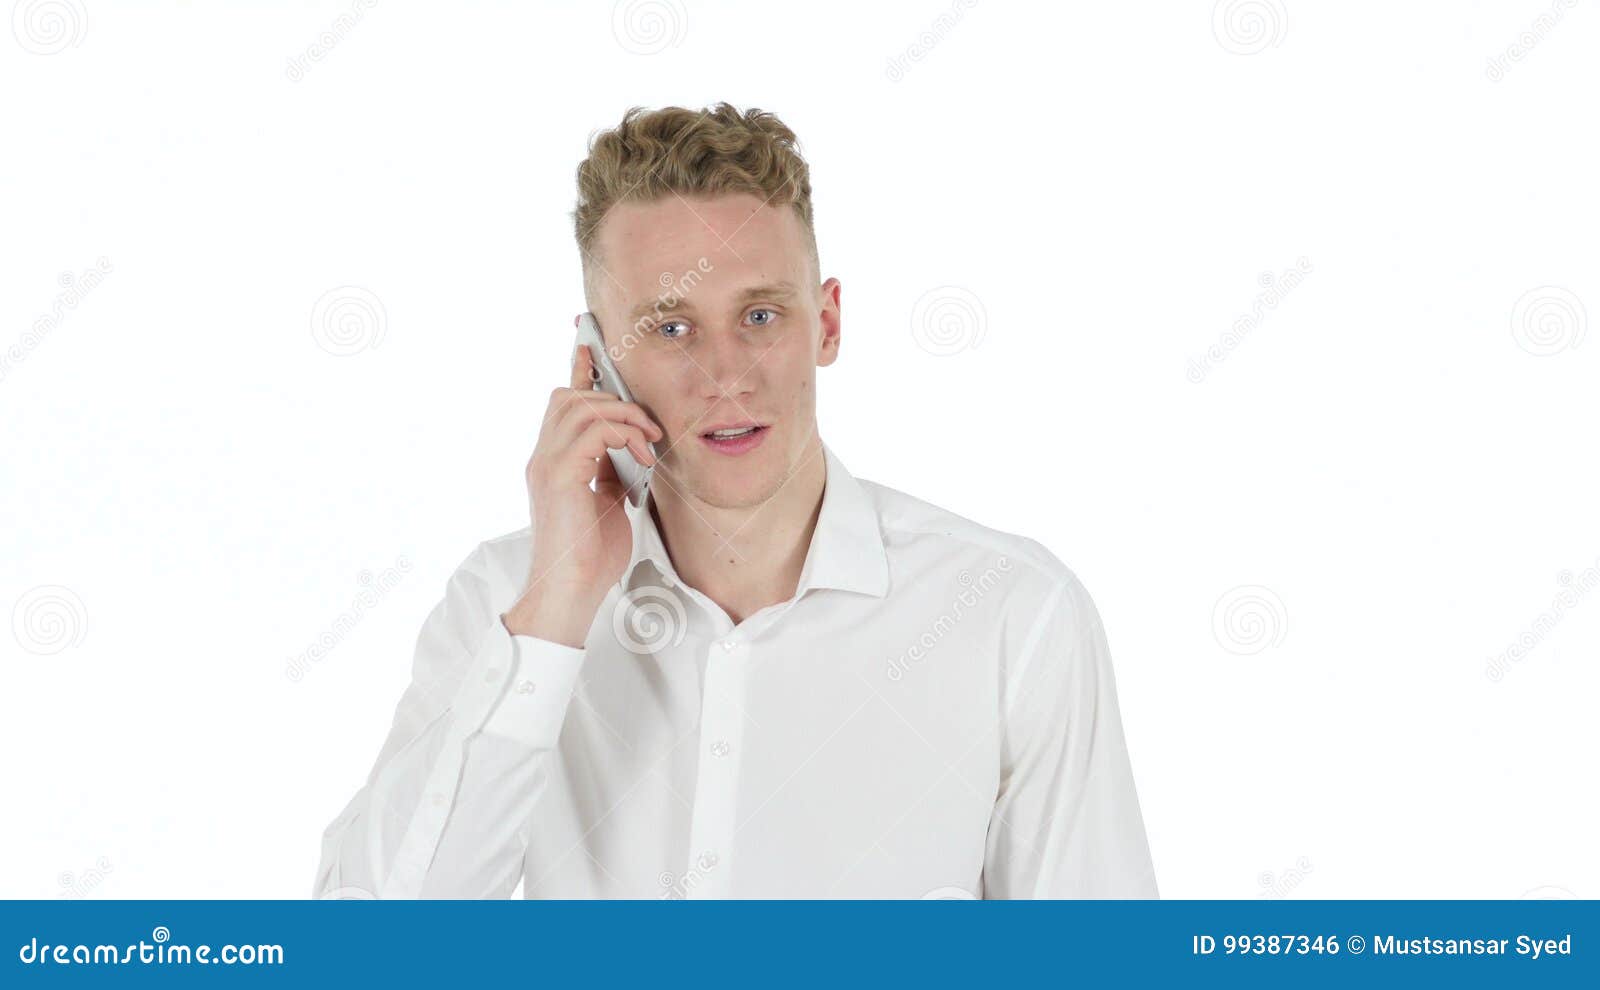 rejecting, denying young man on white background